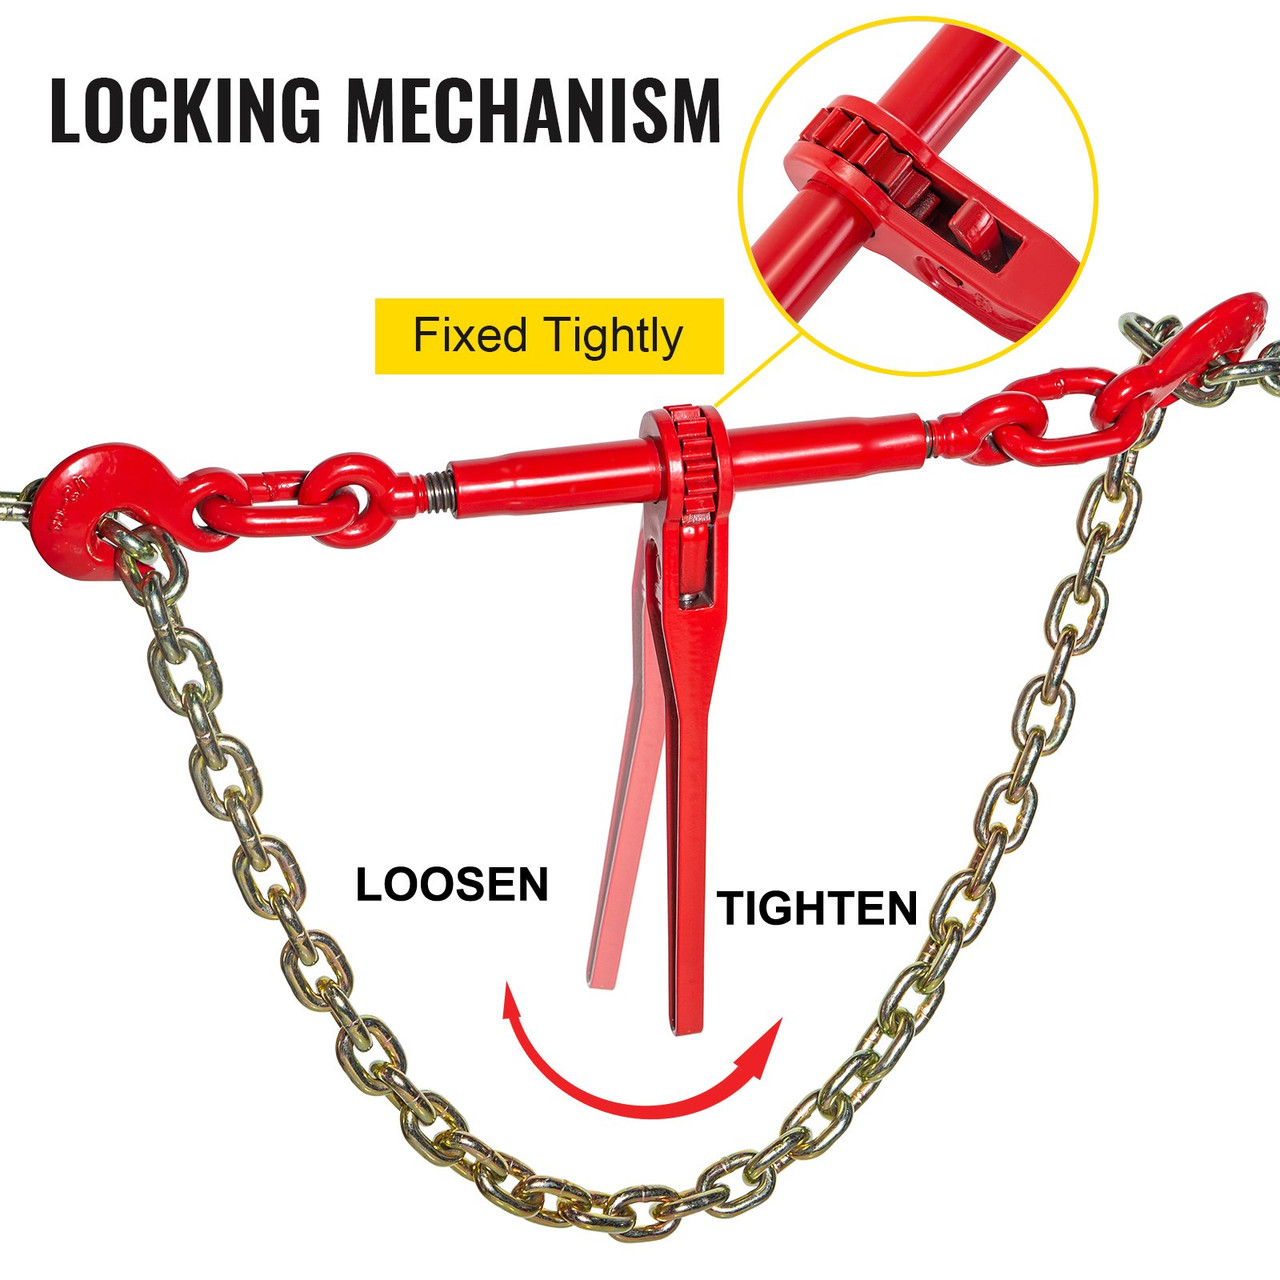 Chain Binder 5/16in x 3/8in, Ratchet Load Binder 6600lbs Capacity, Ratchet Lever Binder w/ G70 Hooks, Adjustable Length, Ratchet Chain Binder for Tie Down, Hauling, Towing, 2-Pack in Red